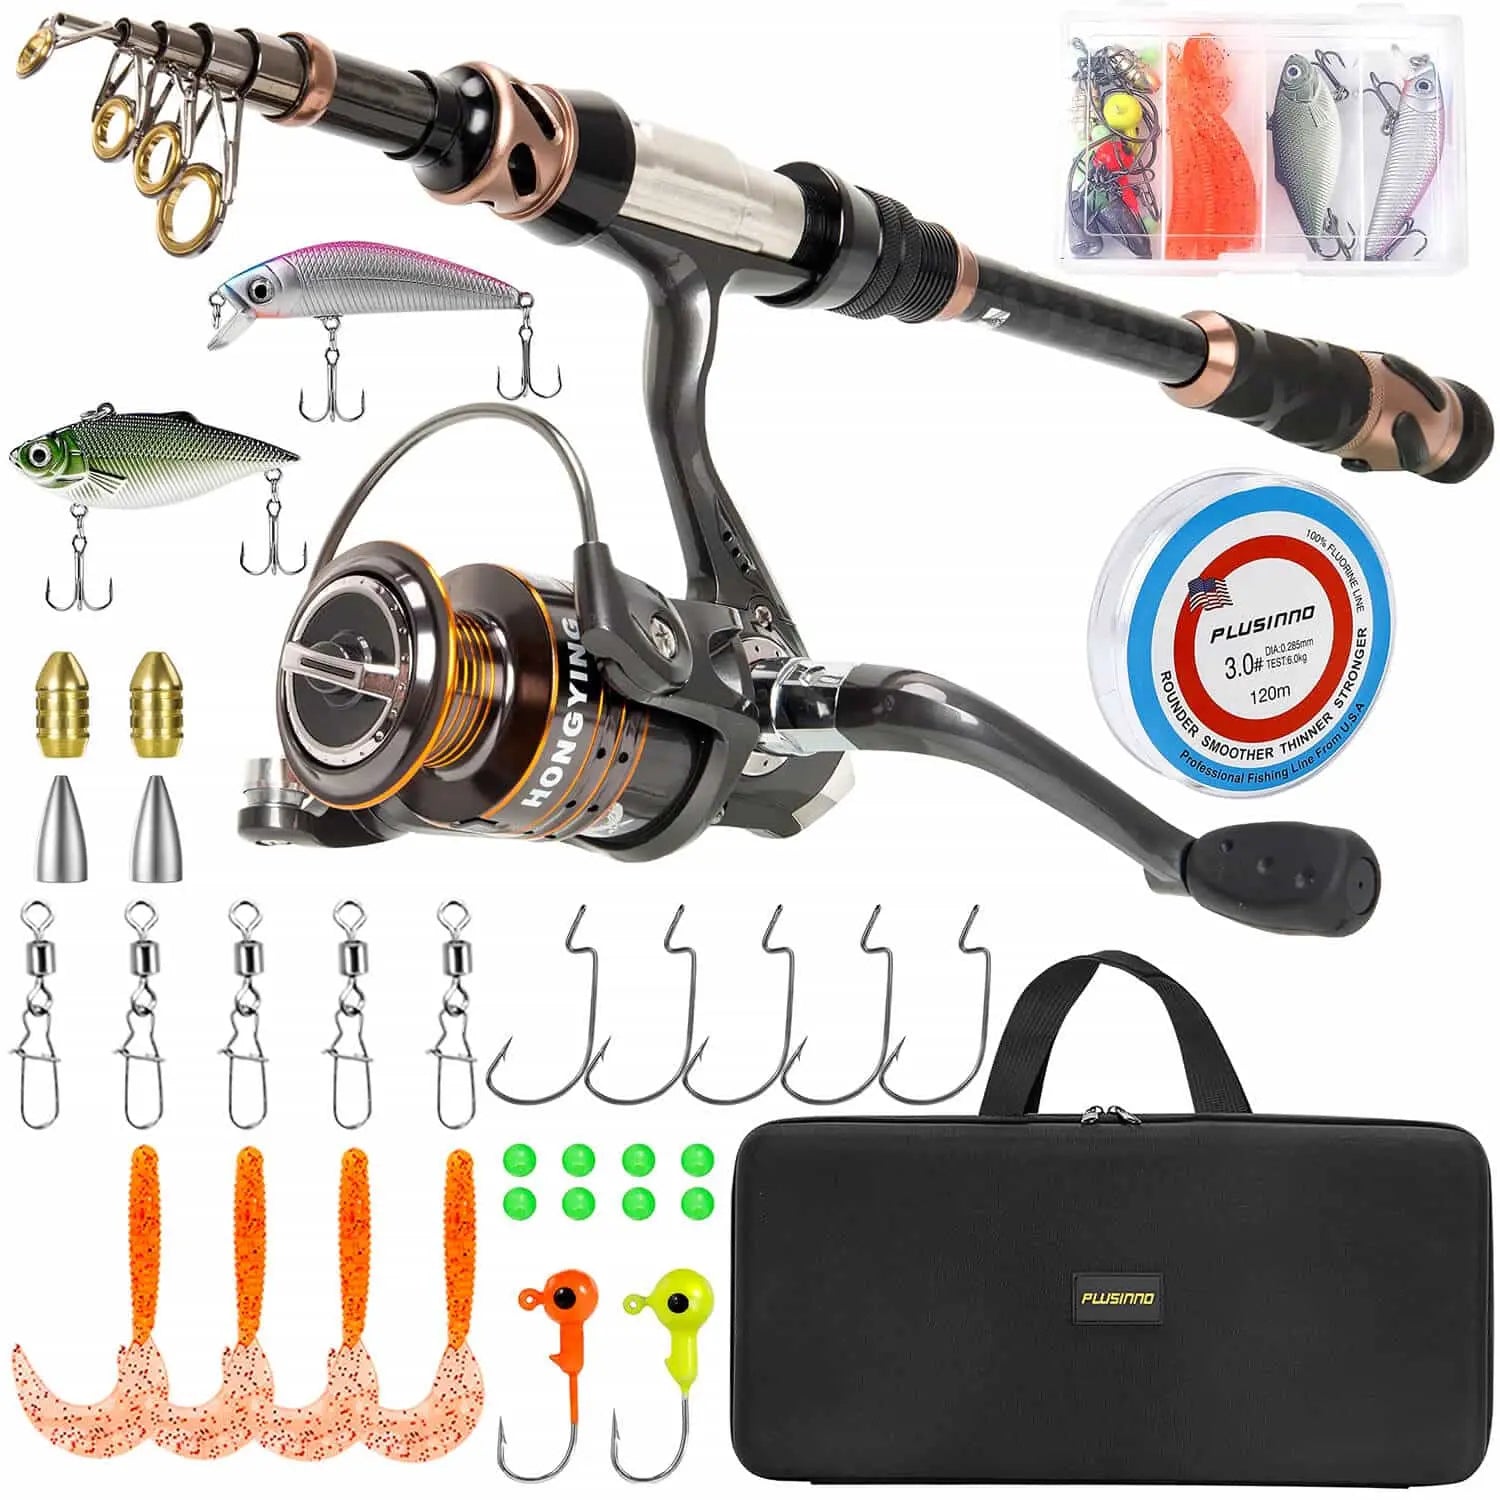 PLUSINNO Eagle Hunting Ⅱ Telescopic Fishing Rods and Reel Combos